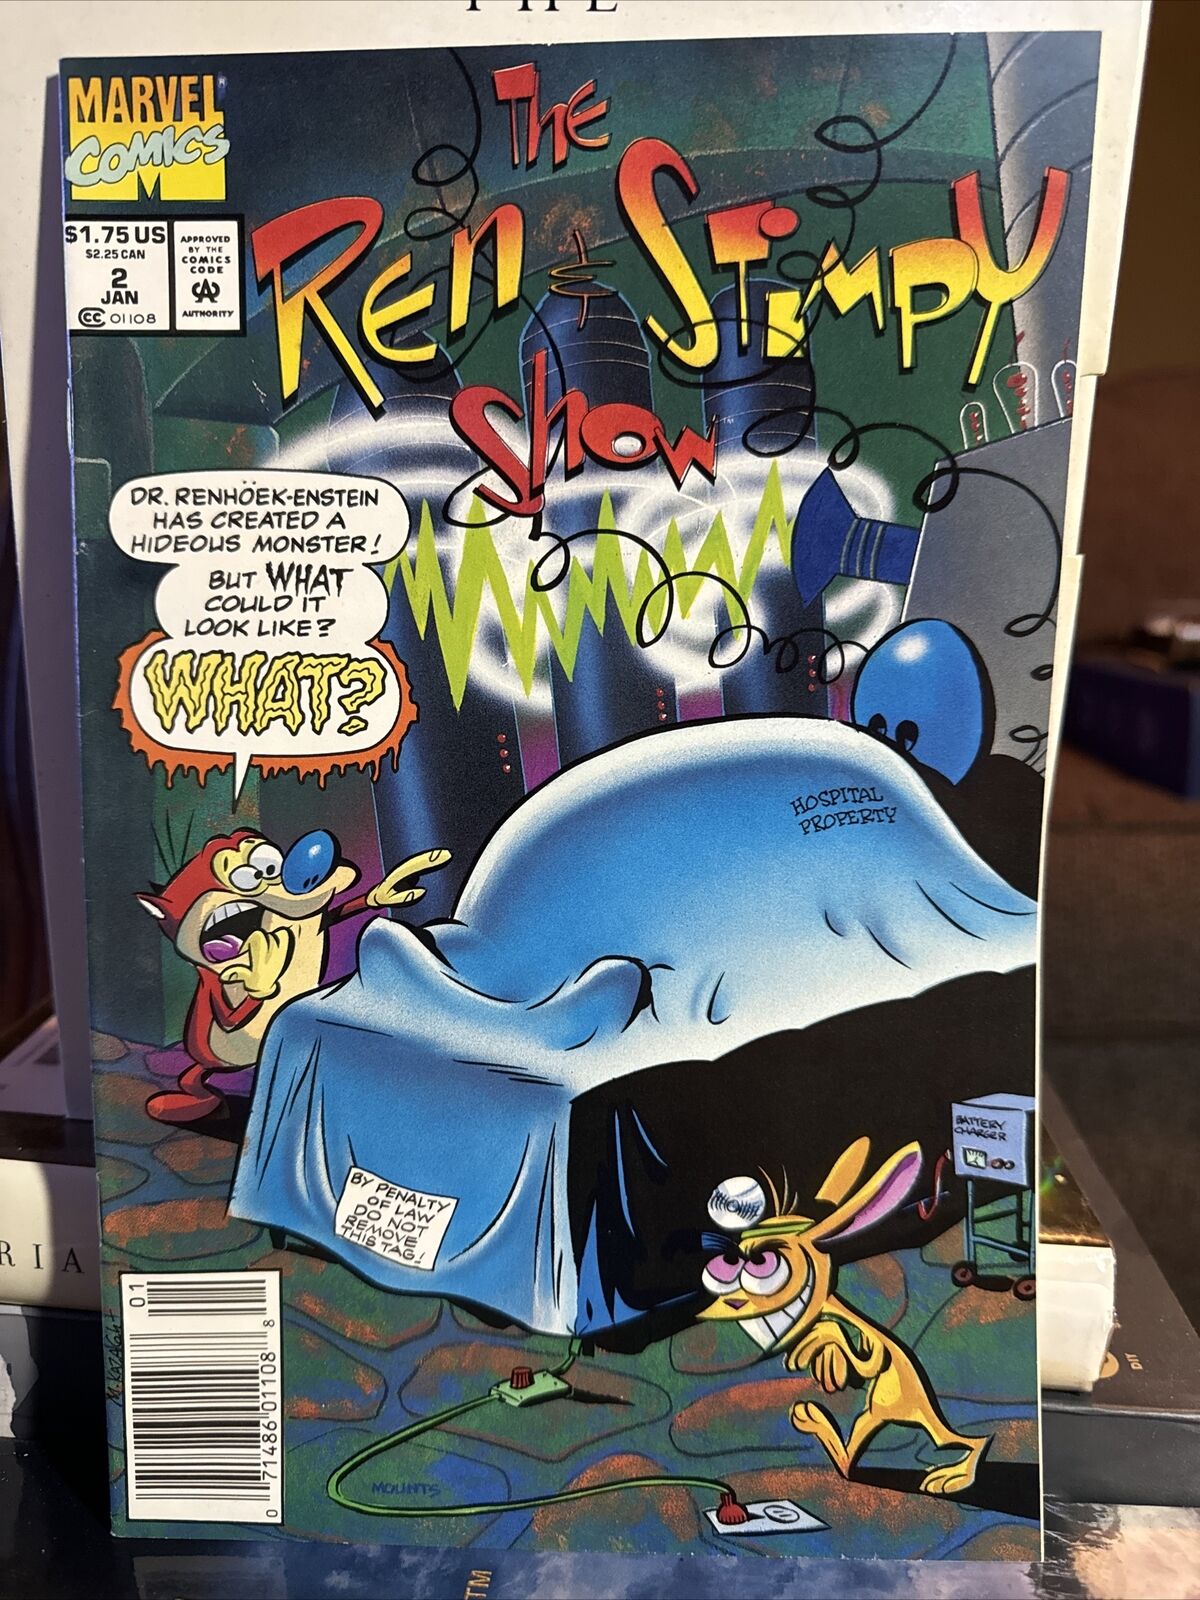 The Ren and Stimpy Show #2 January 1993 Marvel Comics